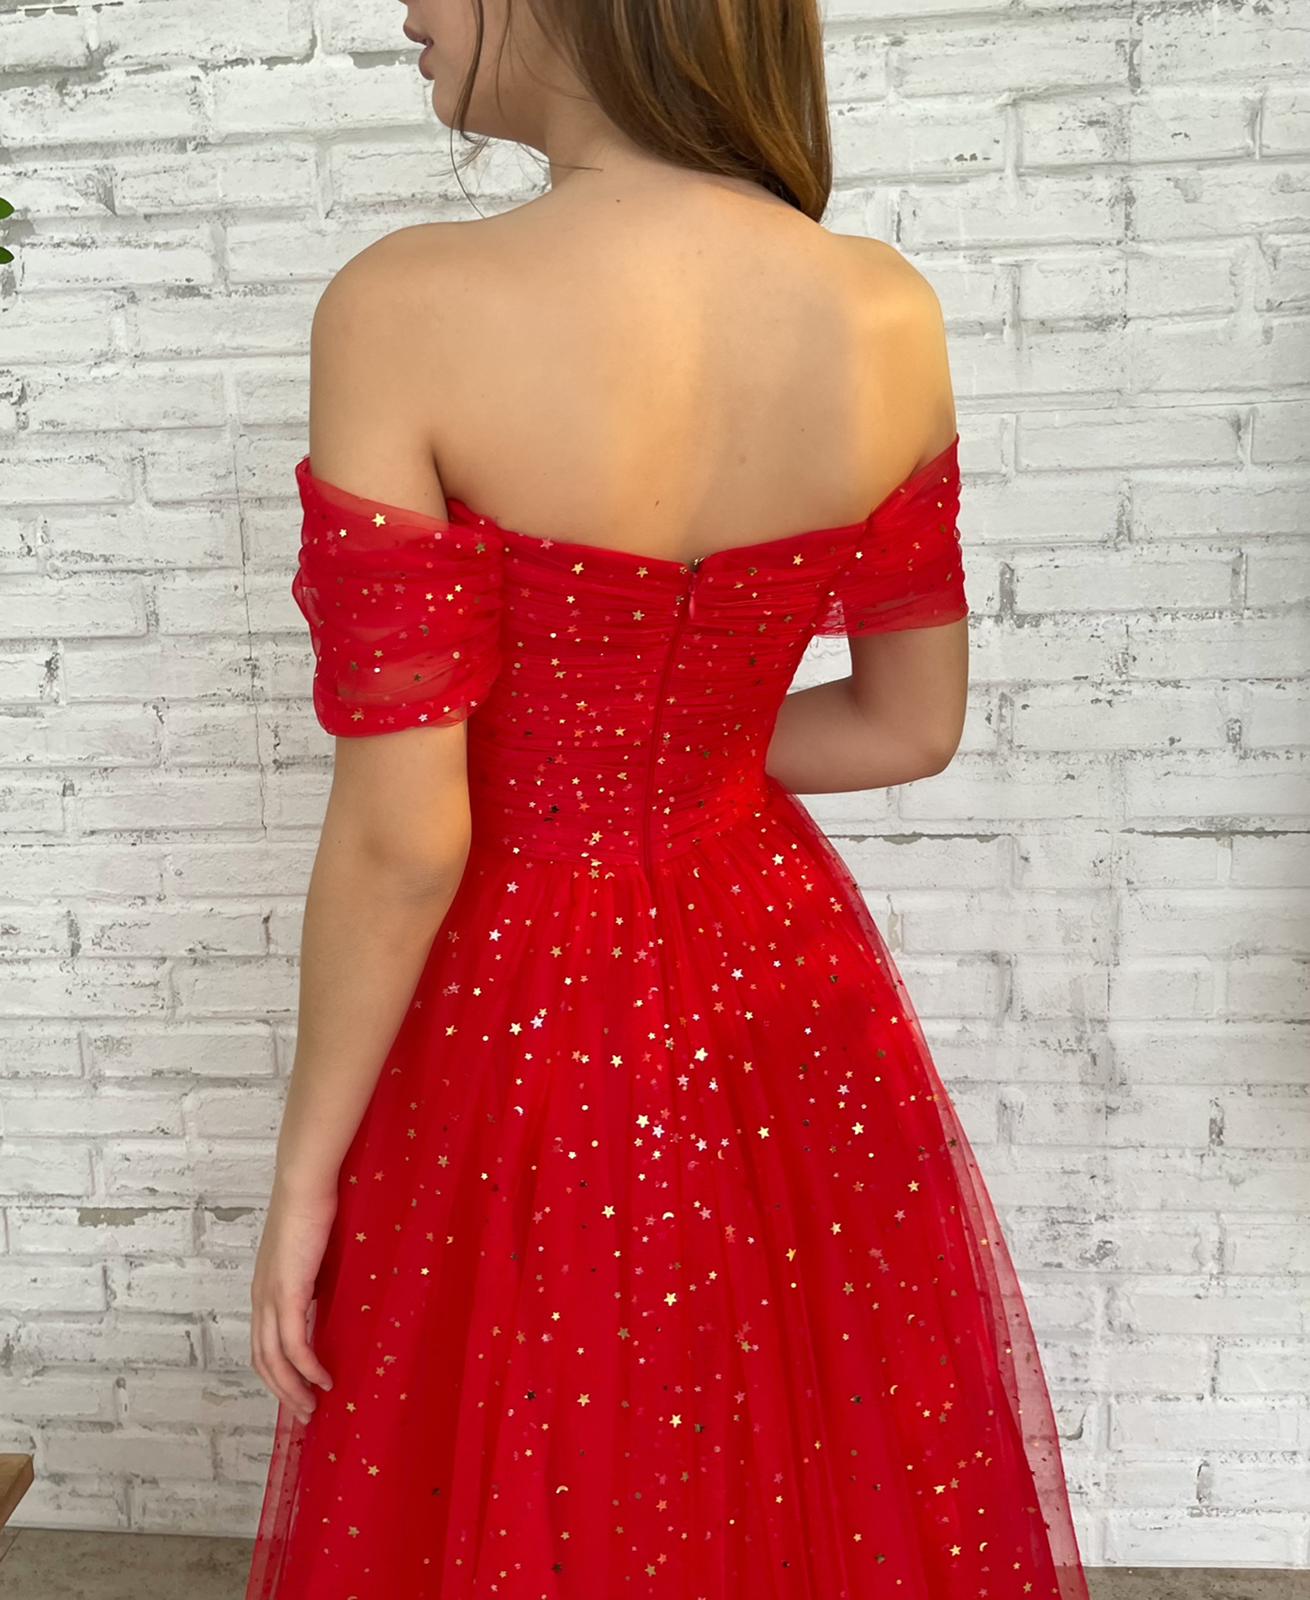 Red A-Line dress with off the shoulder sleeves and starry fabric